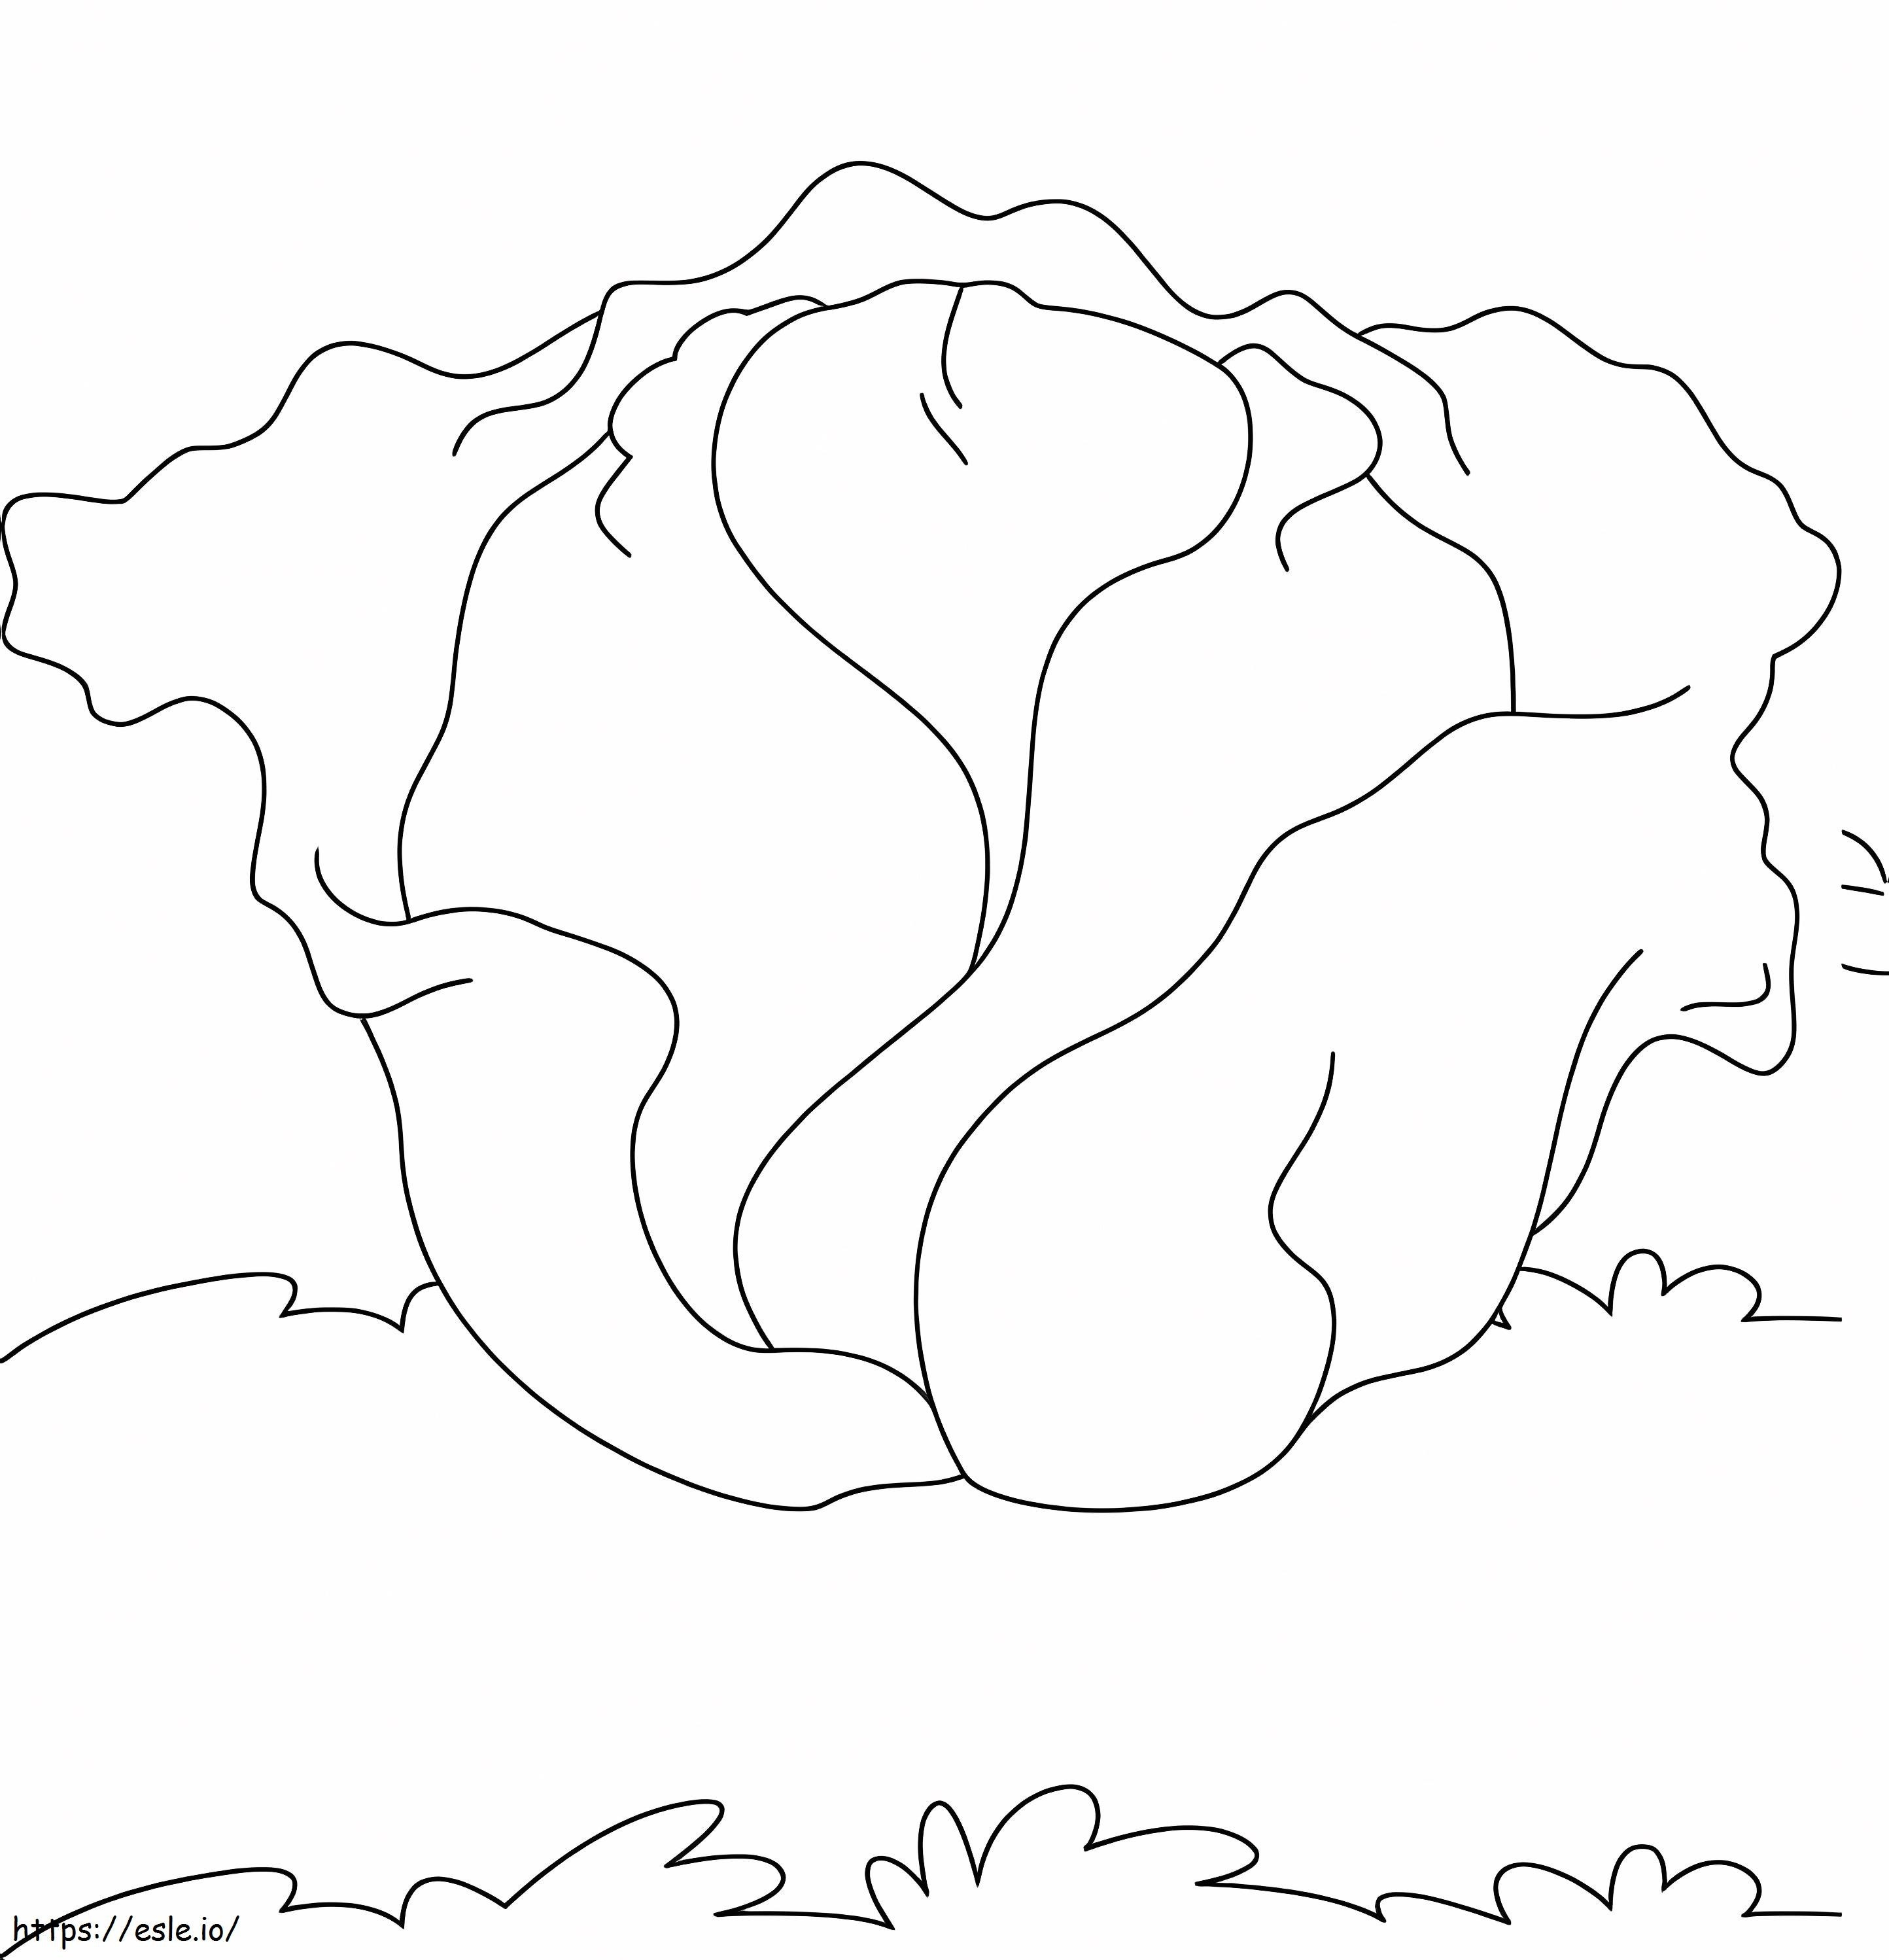 Simple Cabbage 3 coloring page